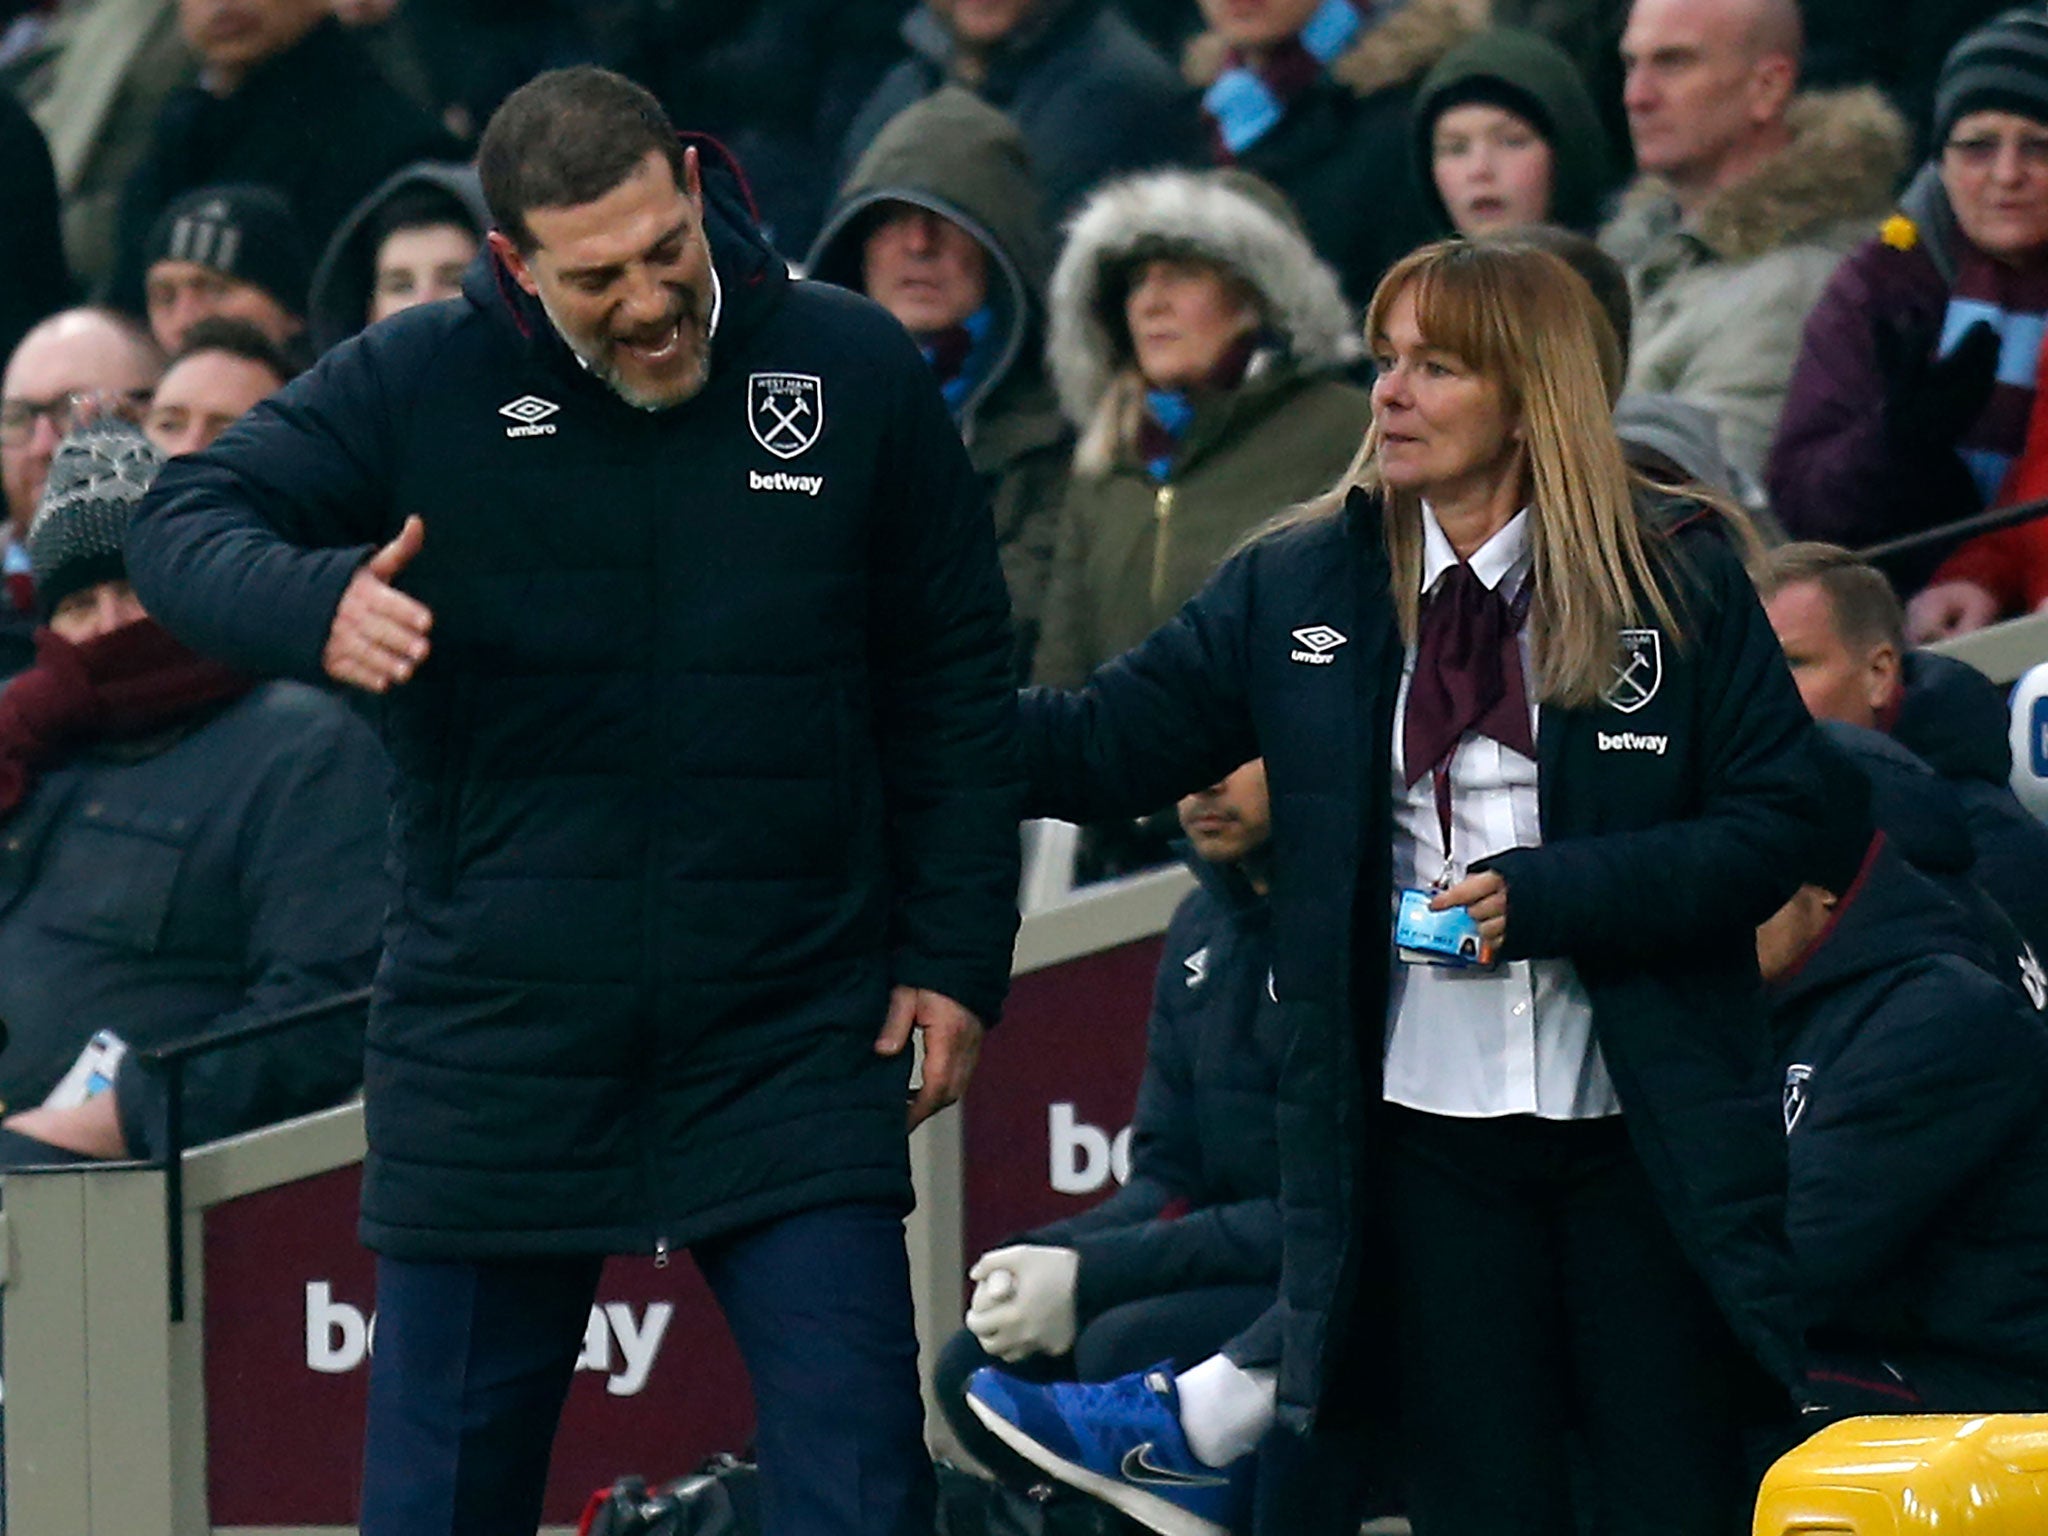 Bilic was dismissed from the touchline for his behaviour